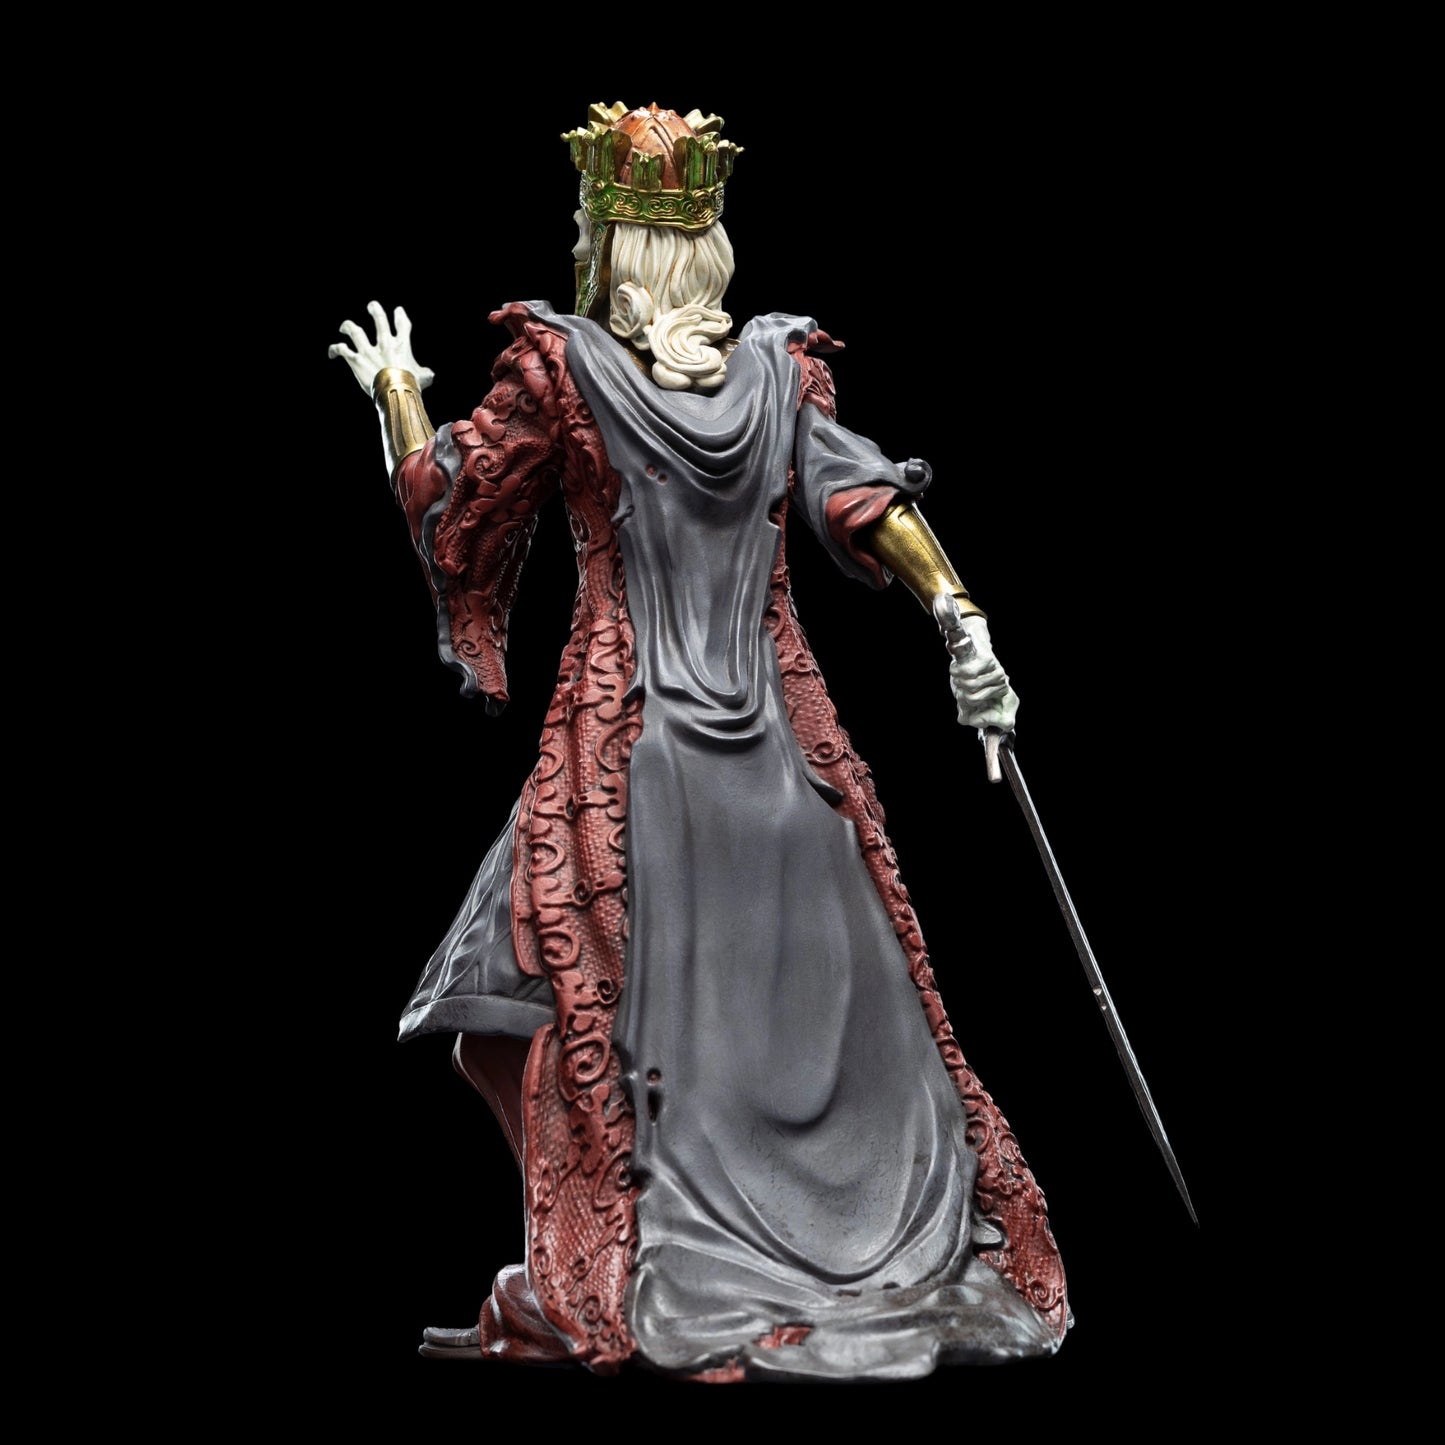 *Pre-Order* King of the Dead (Lord of the Rings) Mini Epics Statue by Weta Workshop